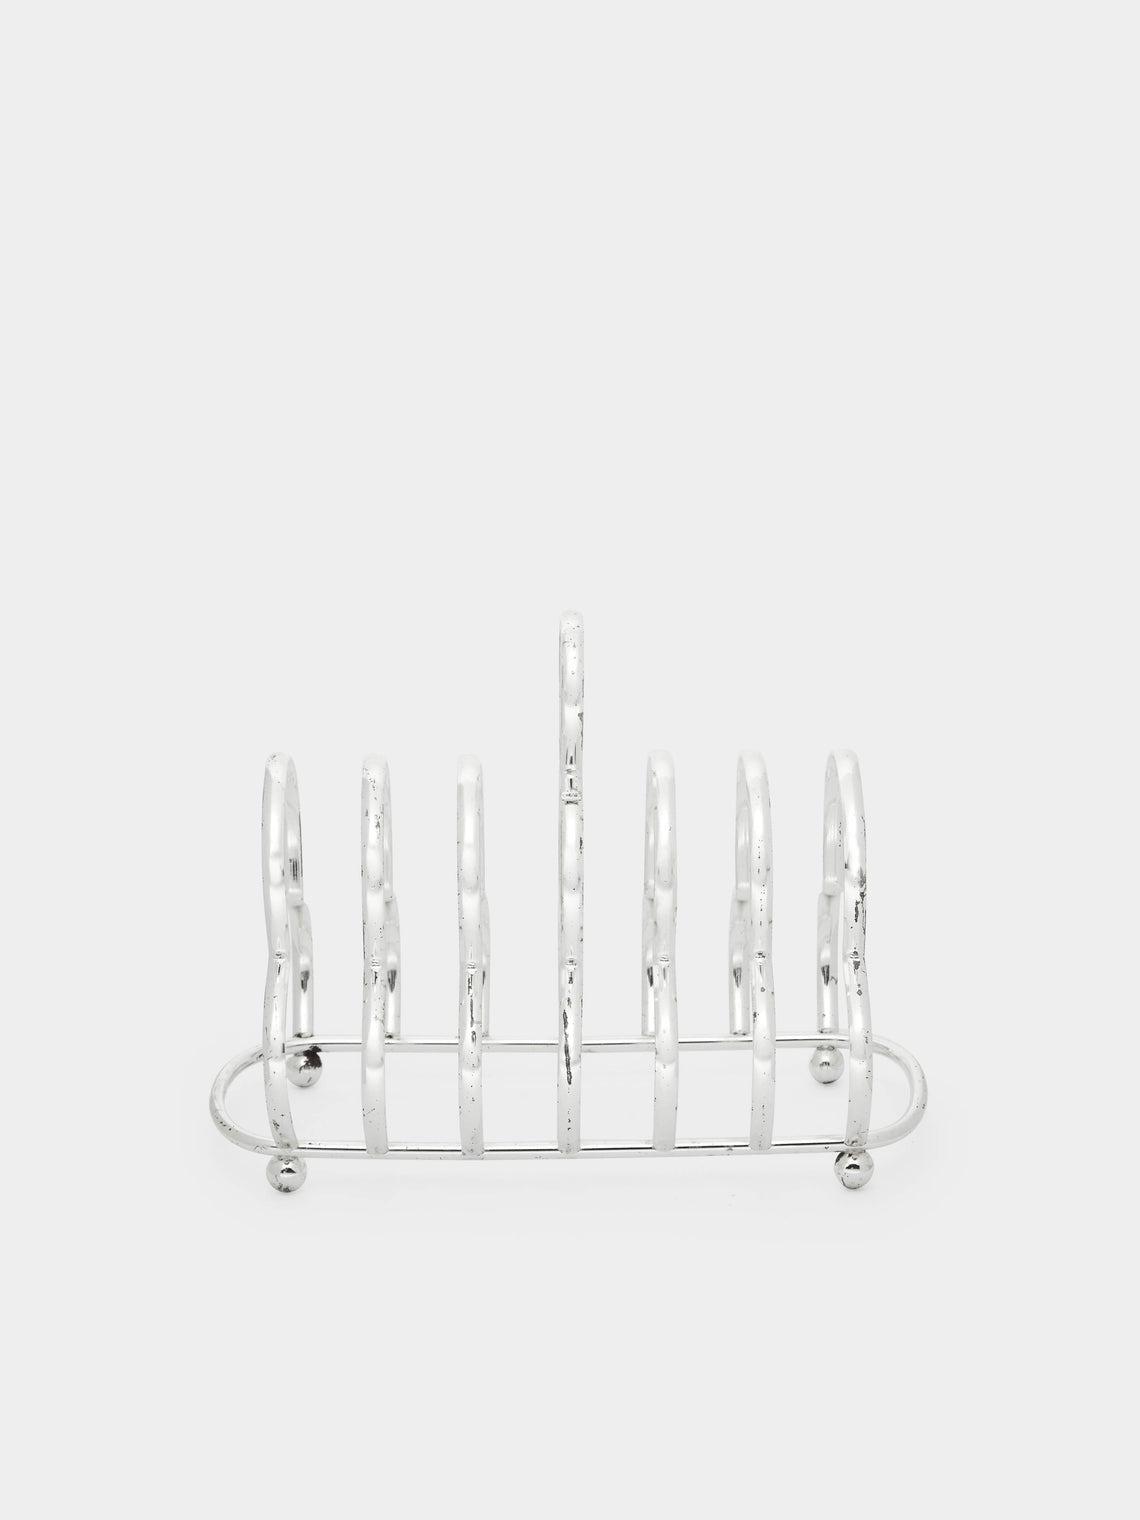 Antique and Vintage - 1900s Silver-Plated Toast Rack -  - ABASK